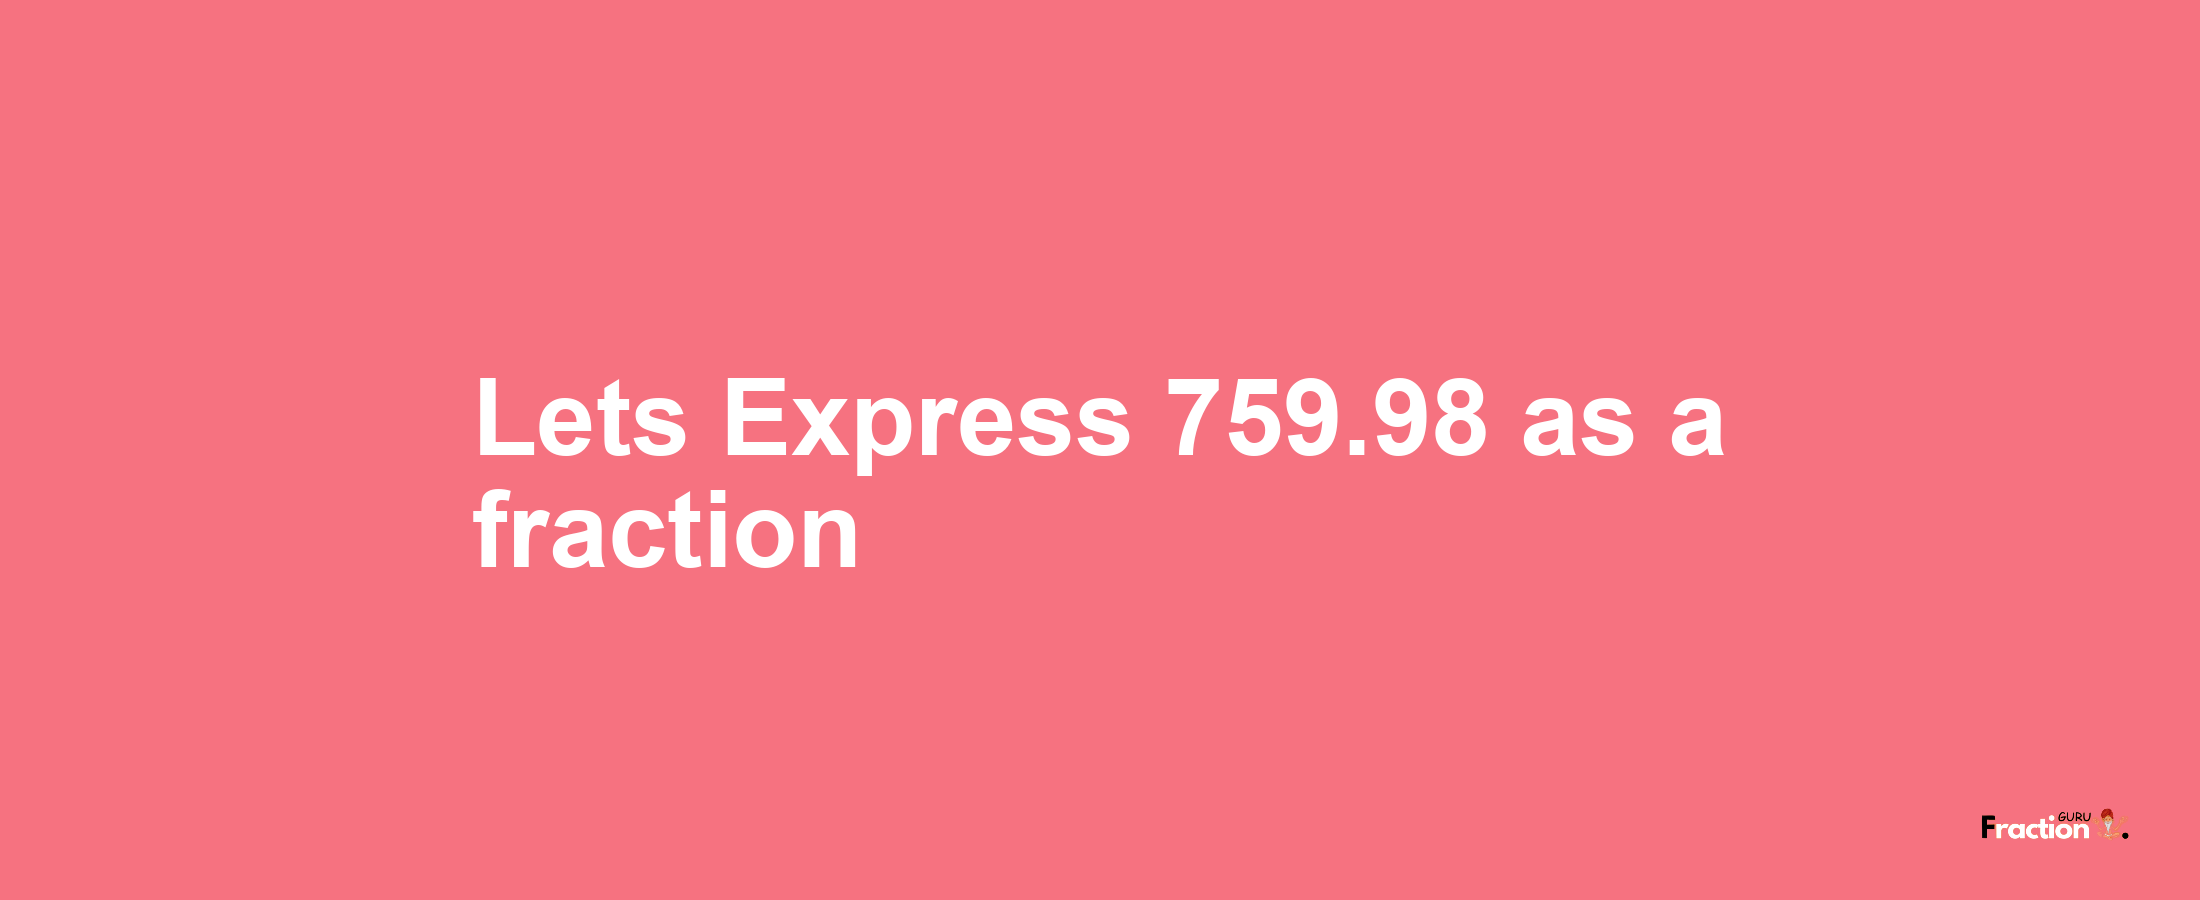 Lets Express 759.98 as afraction